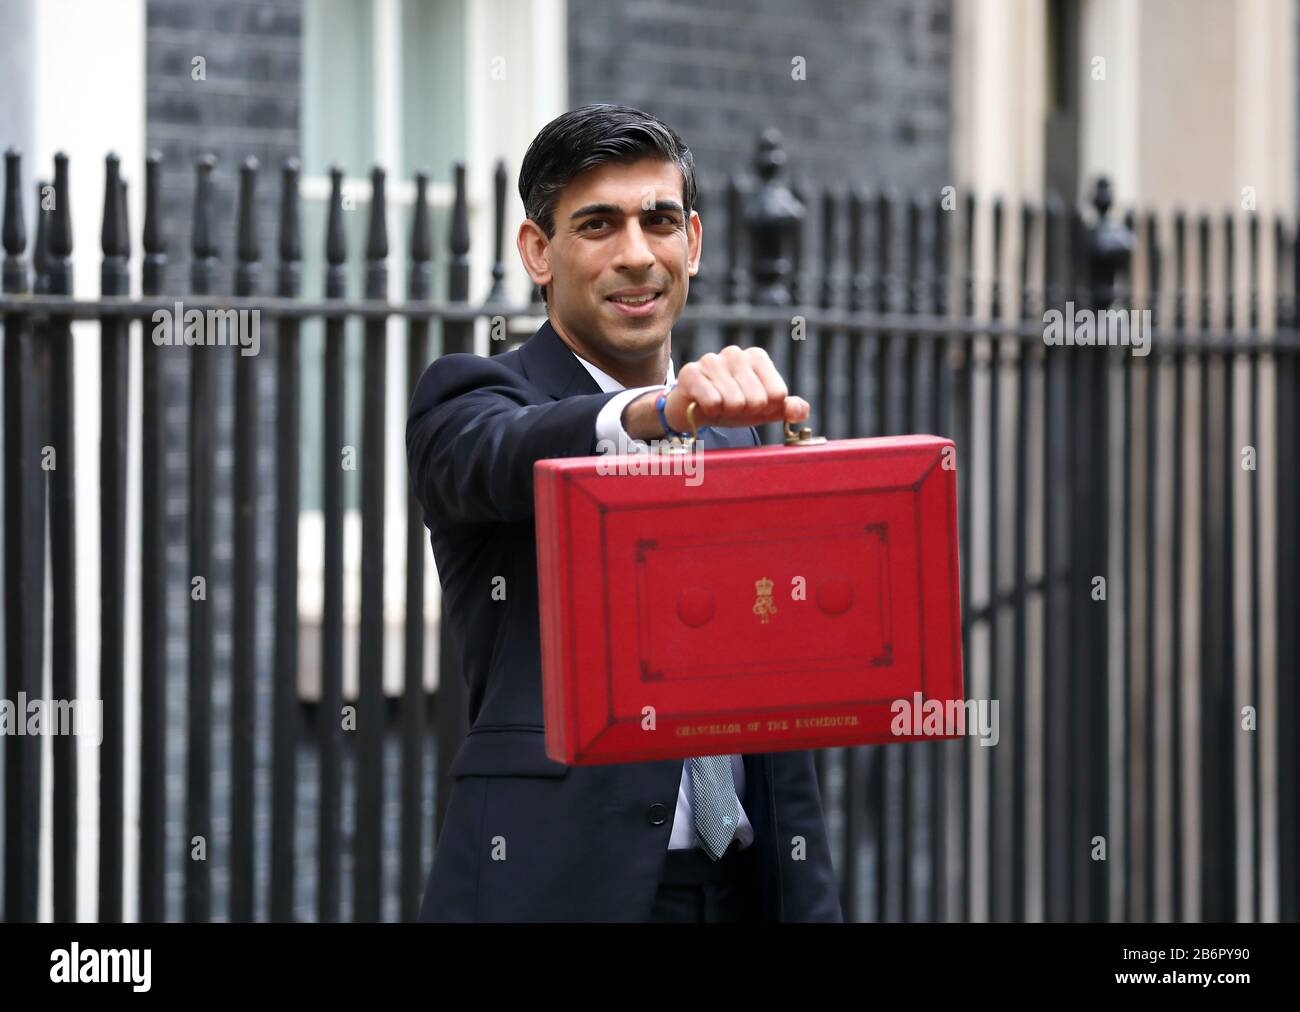 London, UK. 11th Mar, 2020. Rishi Sunak the Chancellor of the Exchequer stands outside Number 11 Downing Street before he delivers his Budget speech in The House of Commons at lunchtime. Budget Day, Downing Street, Westminster, London, March 11, 2020. Credit: Paul Marriott/Alamy Live News Stock Photo